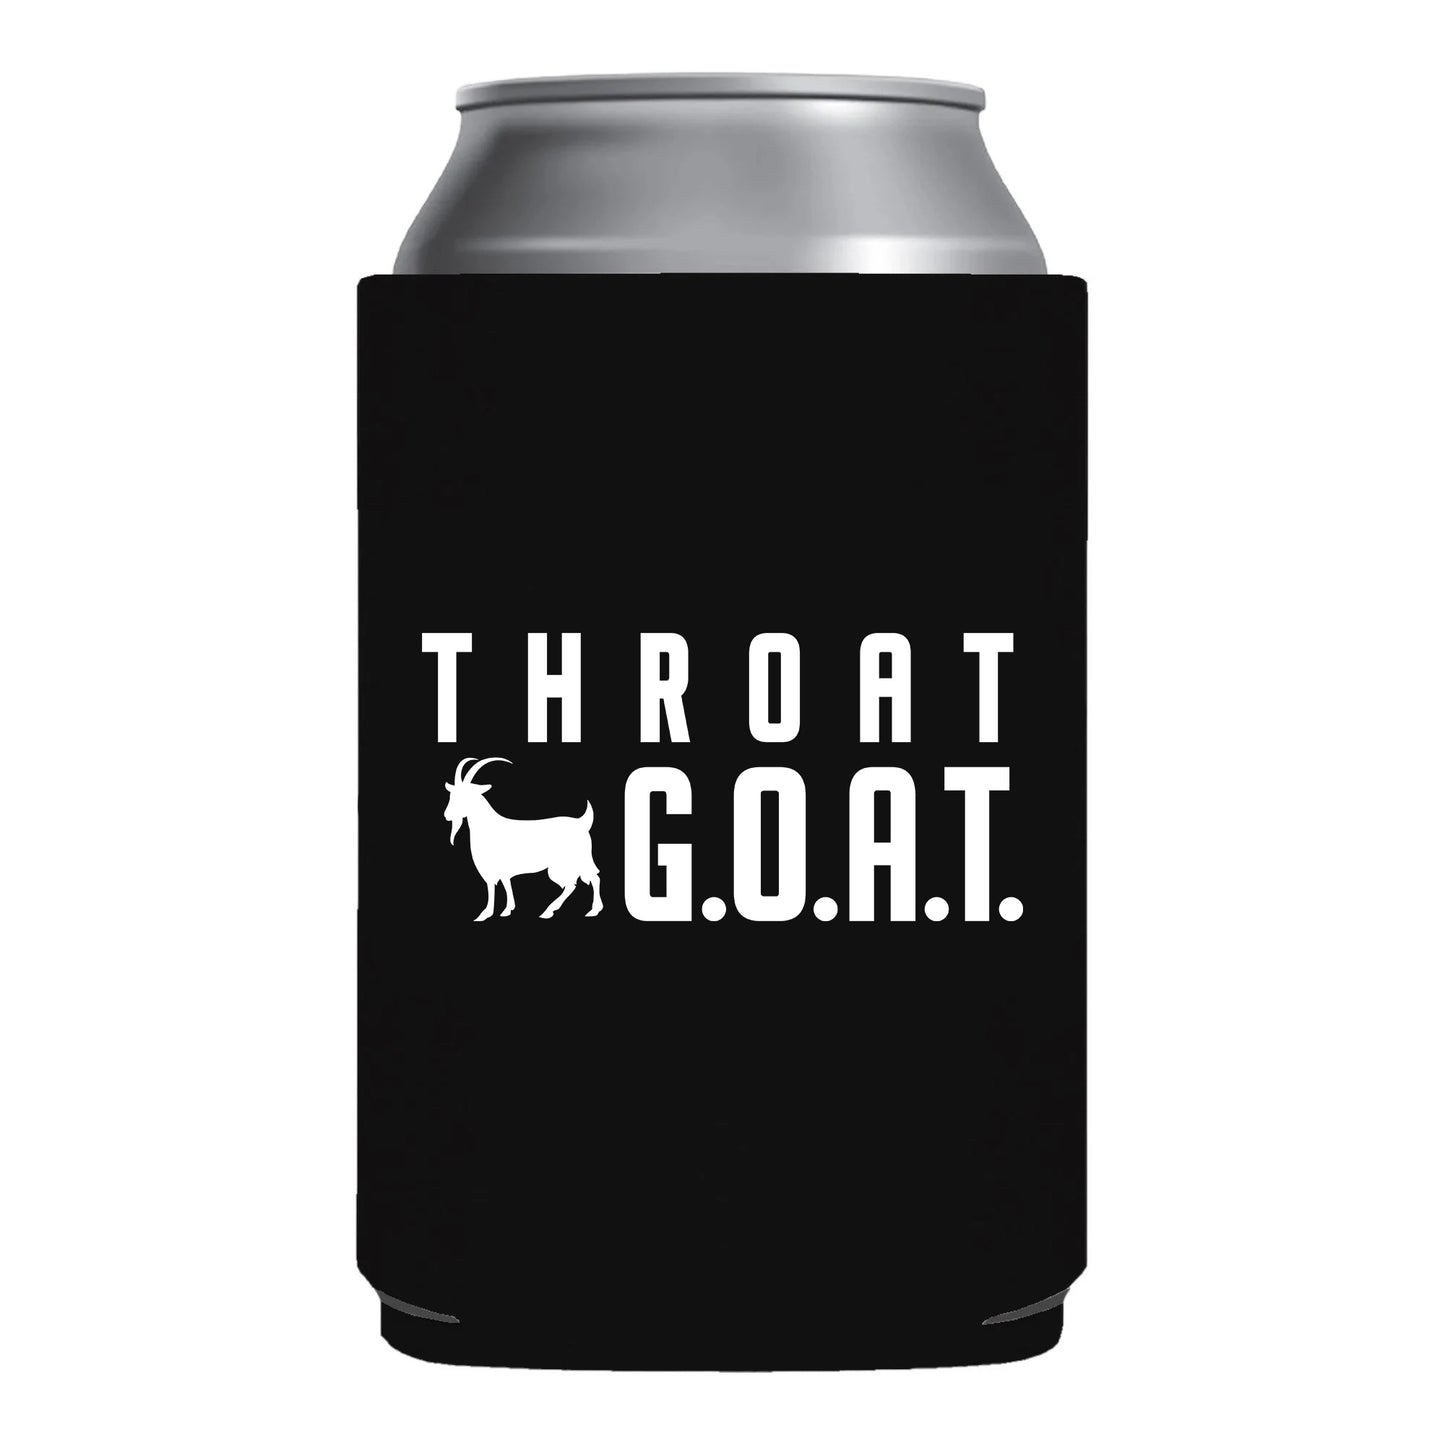 Throat GOAT Funny Beer Can Cooler Holder Sleeve